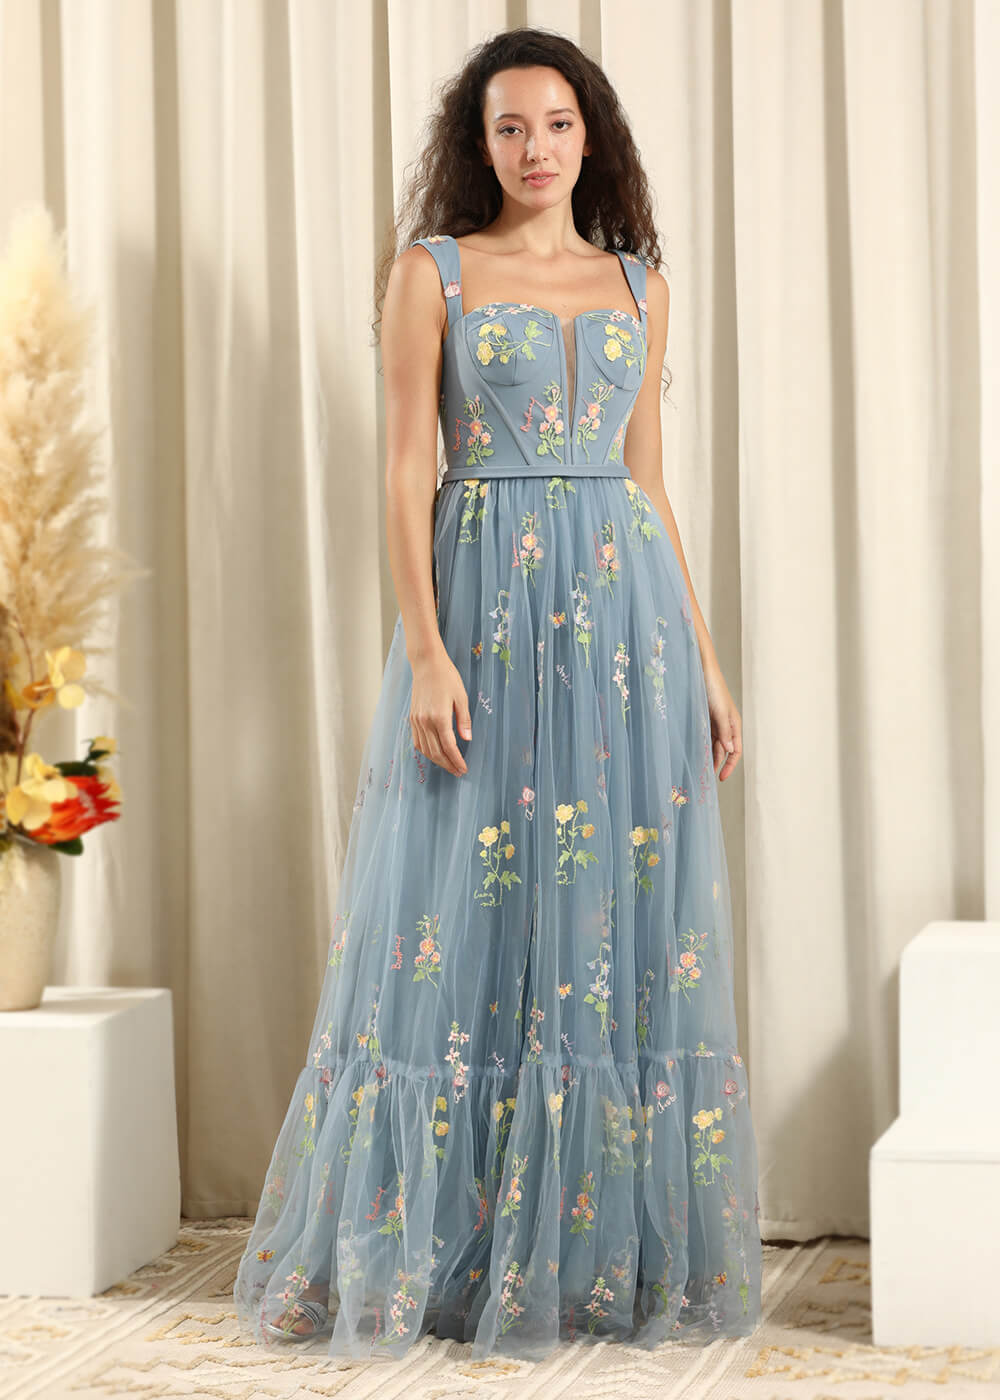 Dusty Blue Square Neck Sleeveless Floral Tulle A-line Long Bridesmaid